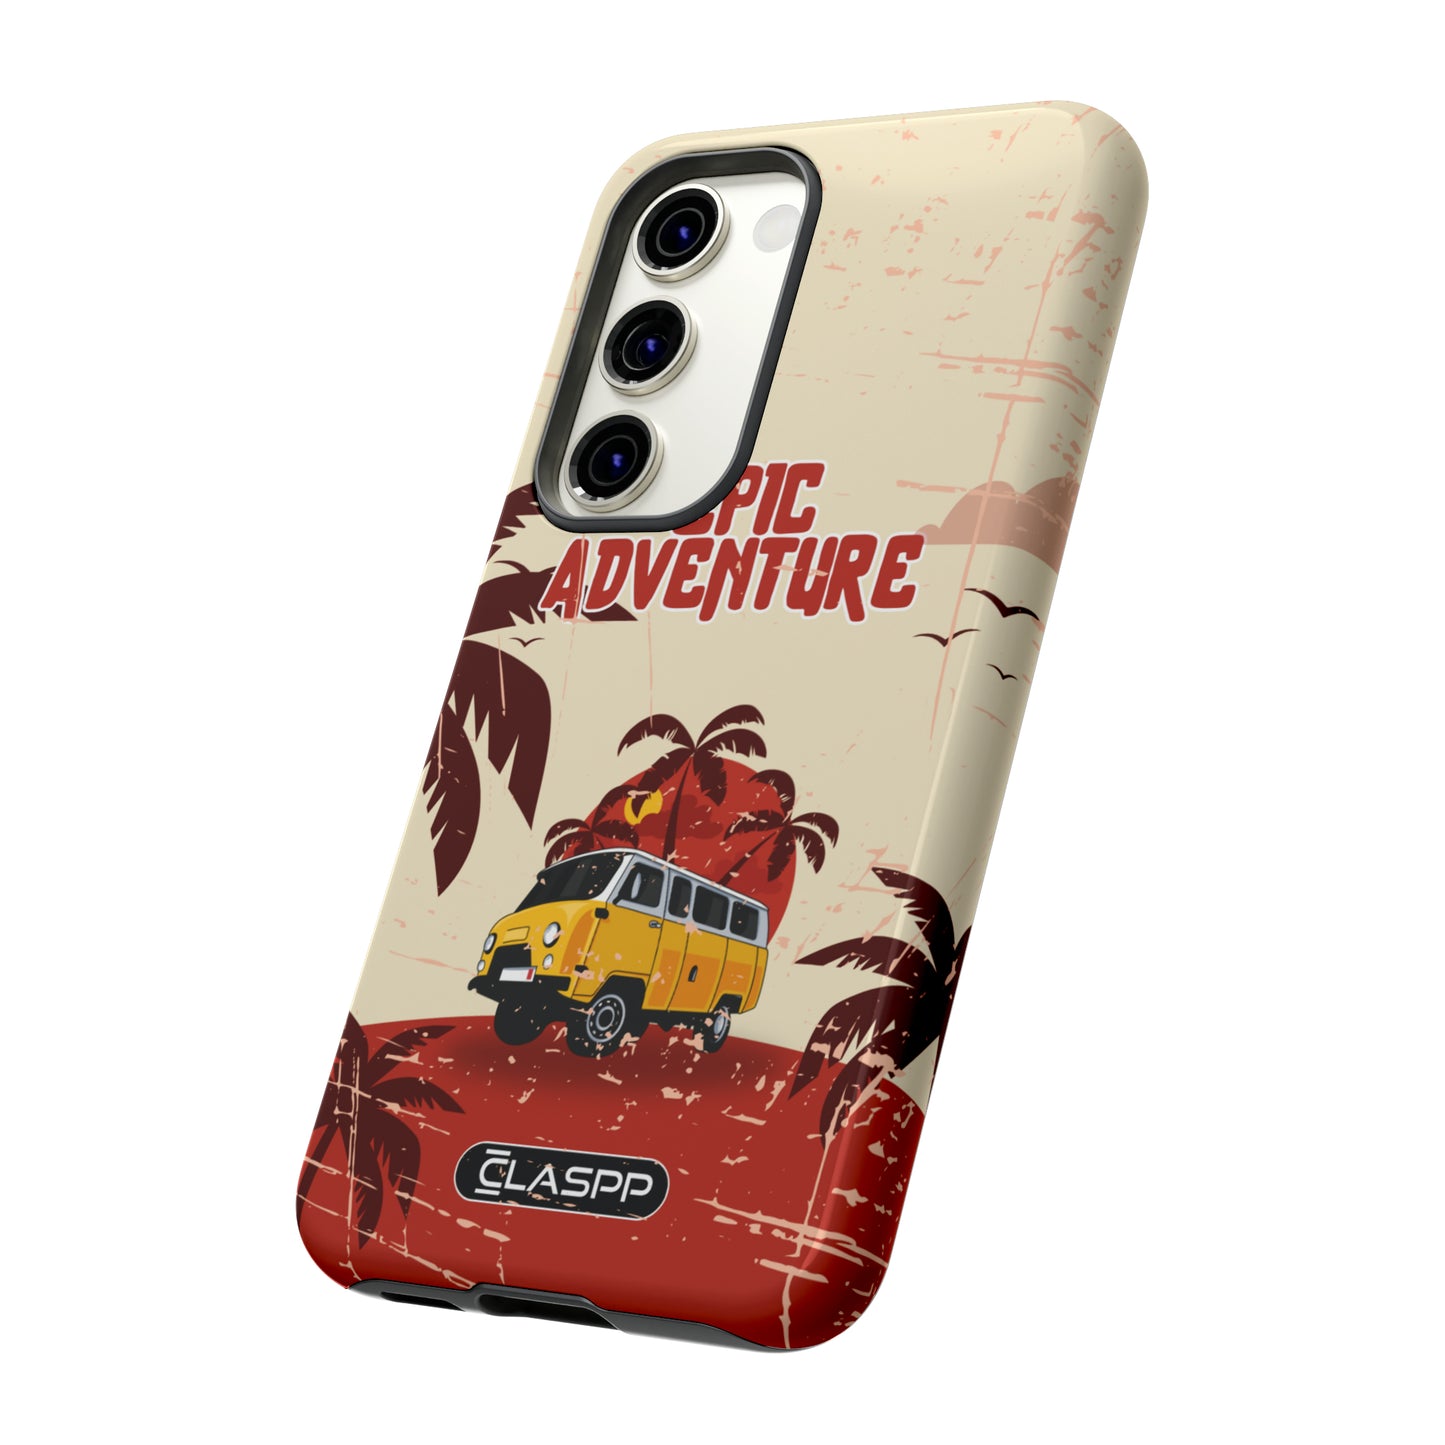 Epic Adventure Edition 2 | Recyclable Dual Layer Tough Phone Case